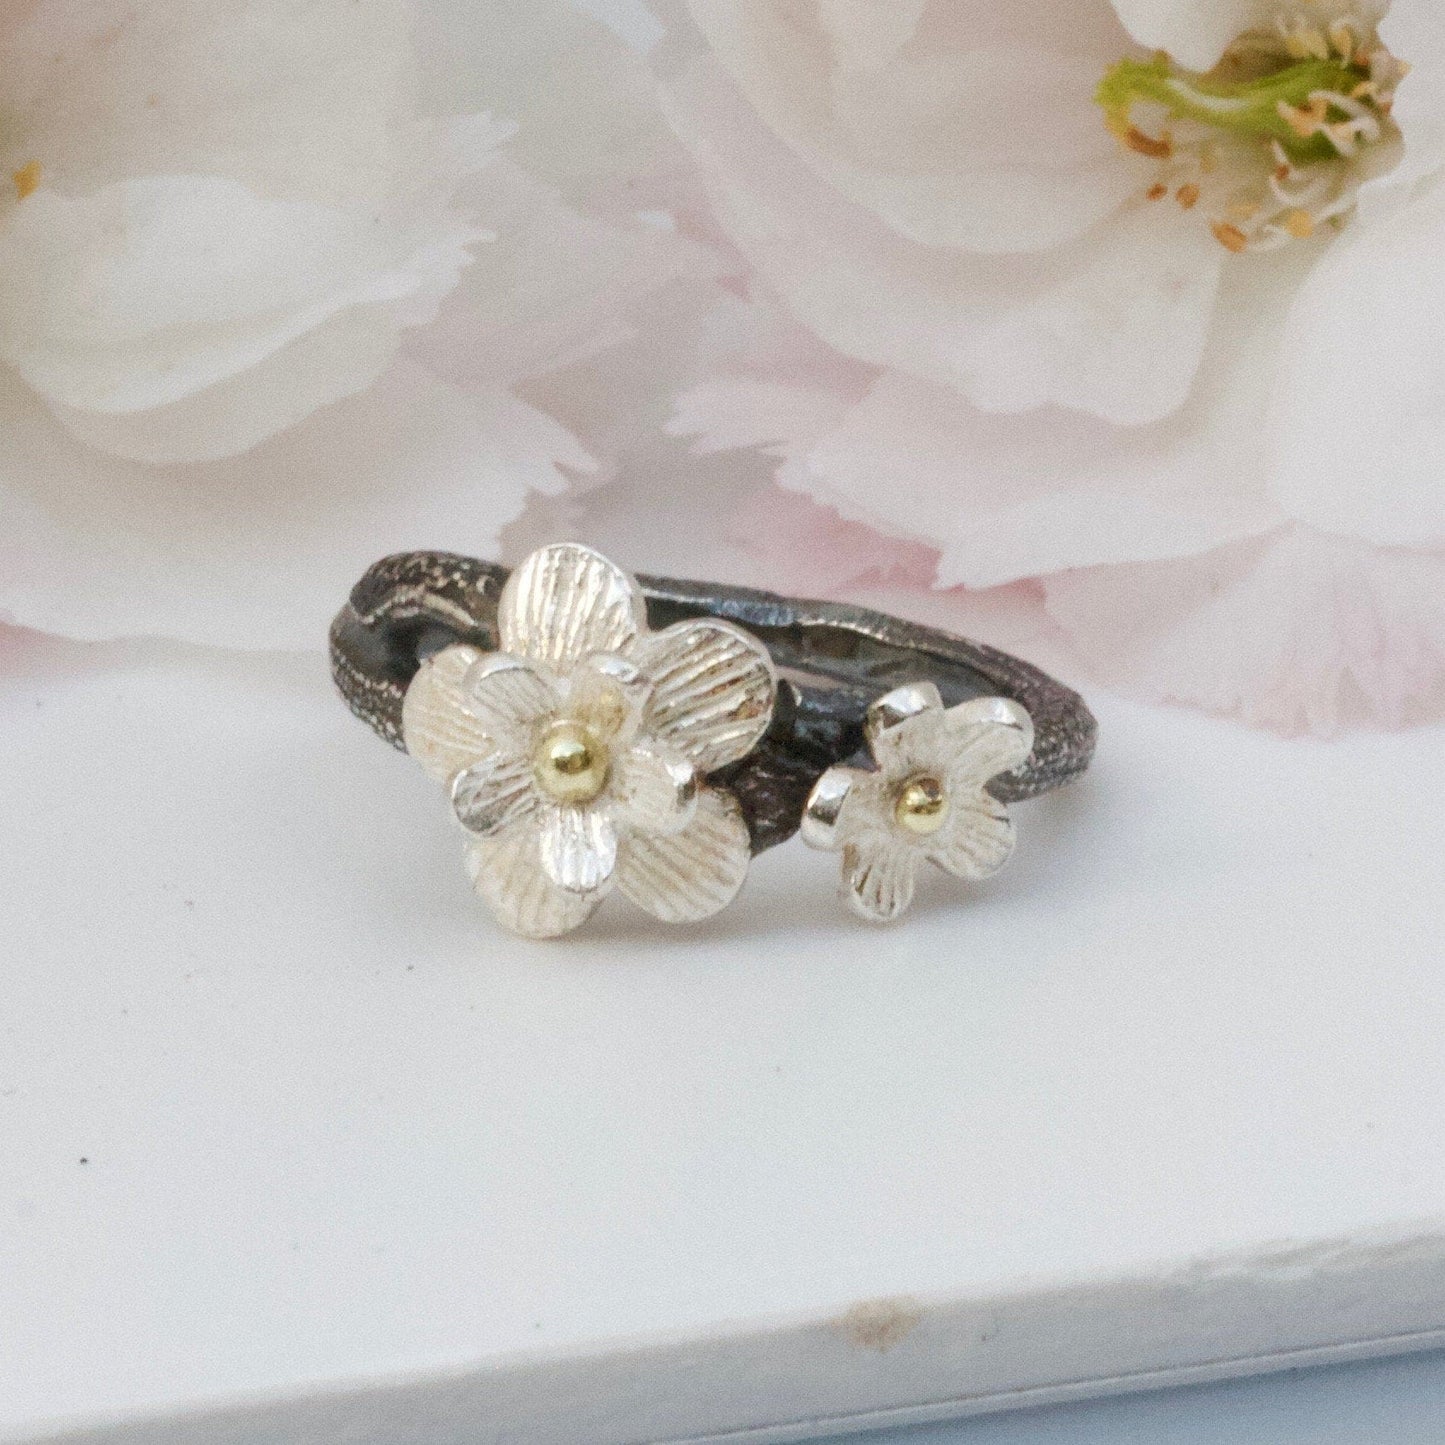 Cherry Blossom Ring. Mixed Metal Silver and Gold. Nature Jewellery